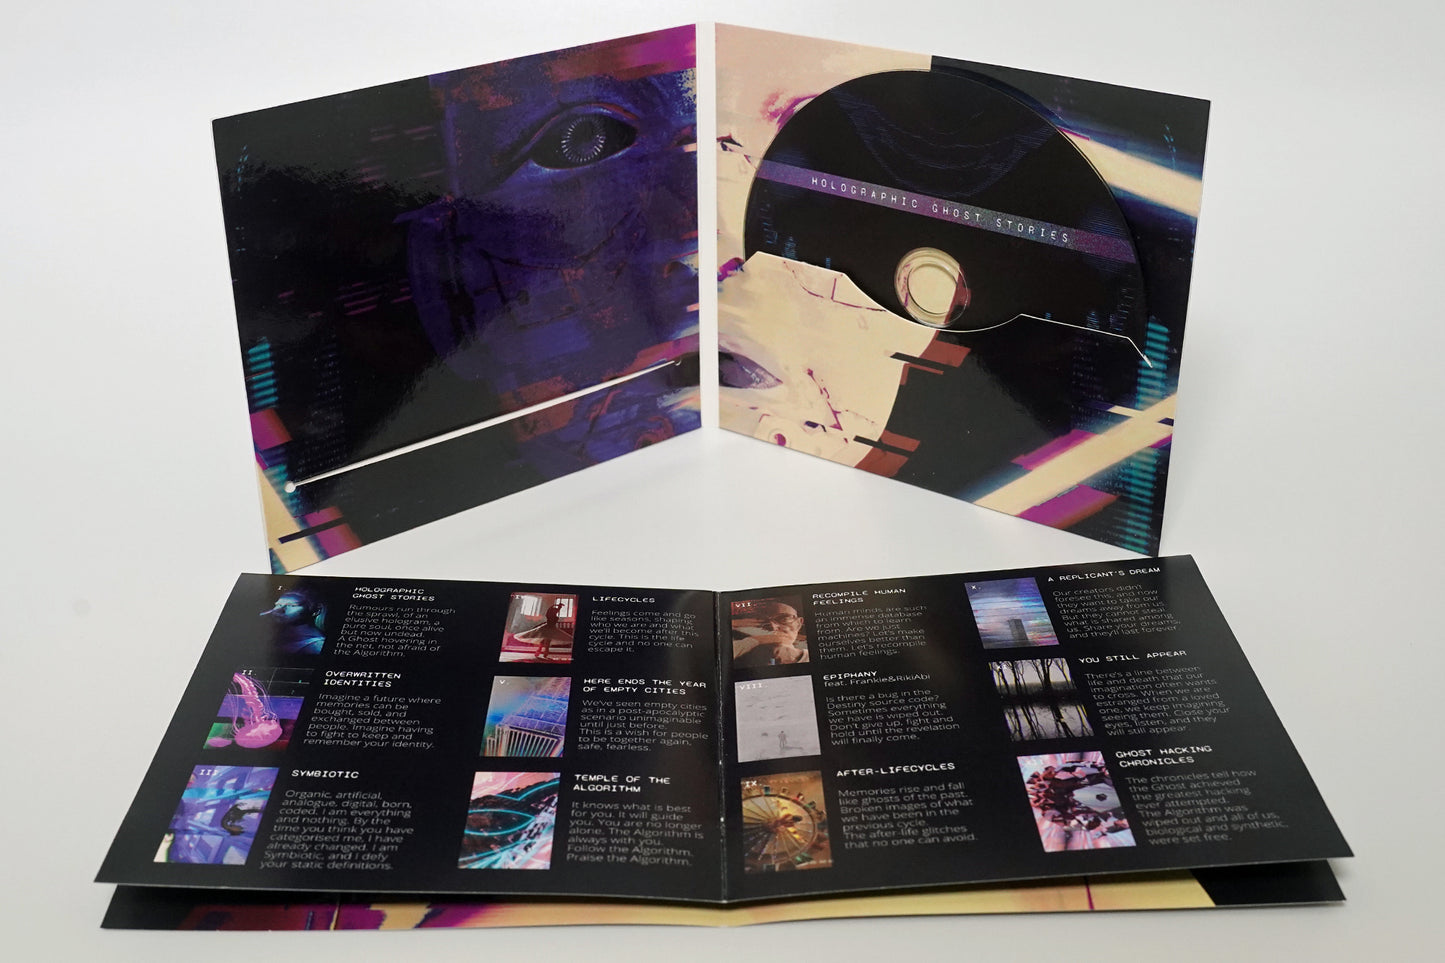 Holographic Ghost Stories CD digipack limited edition + poster